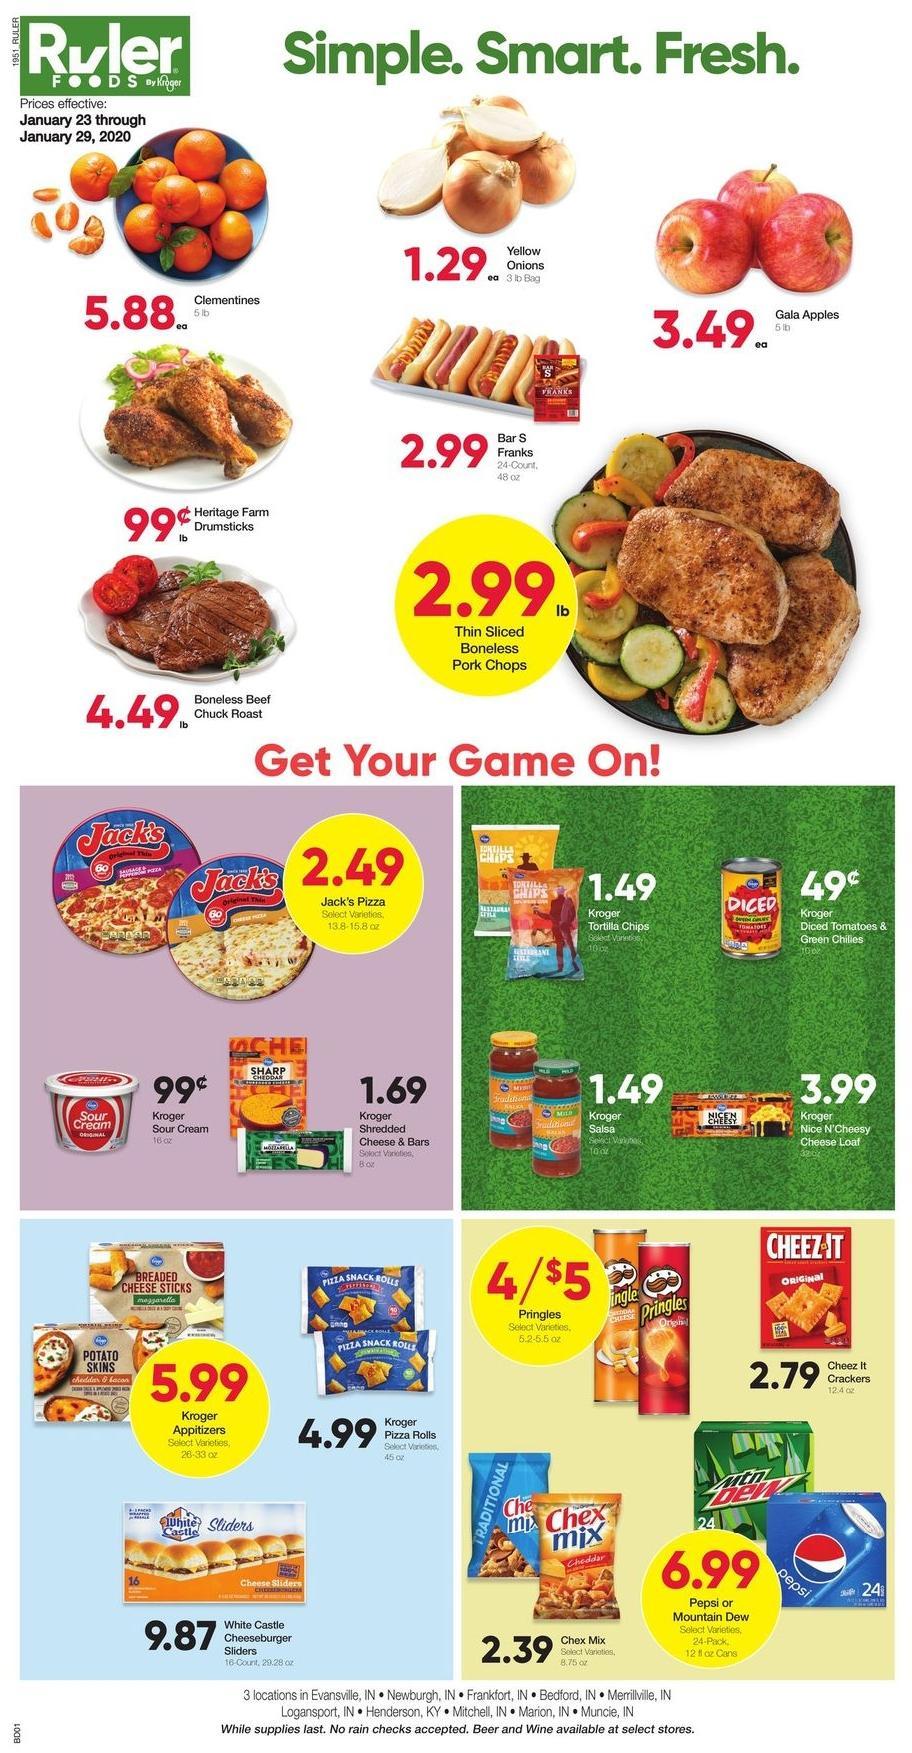 Ruler Foods Weekly Ad from January 23